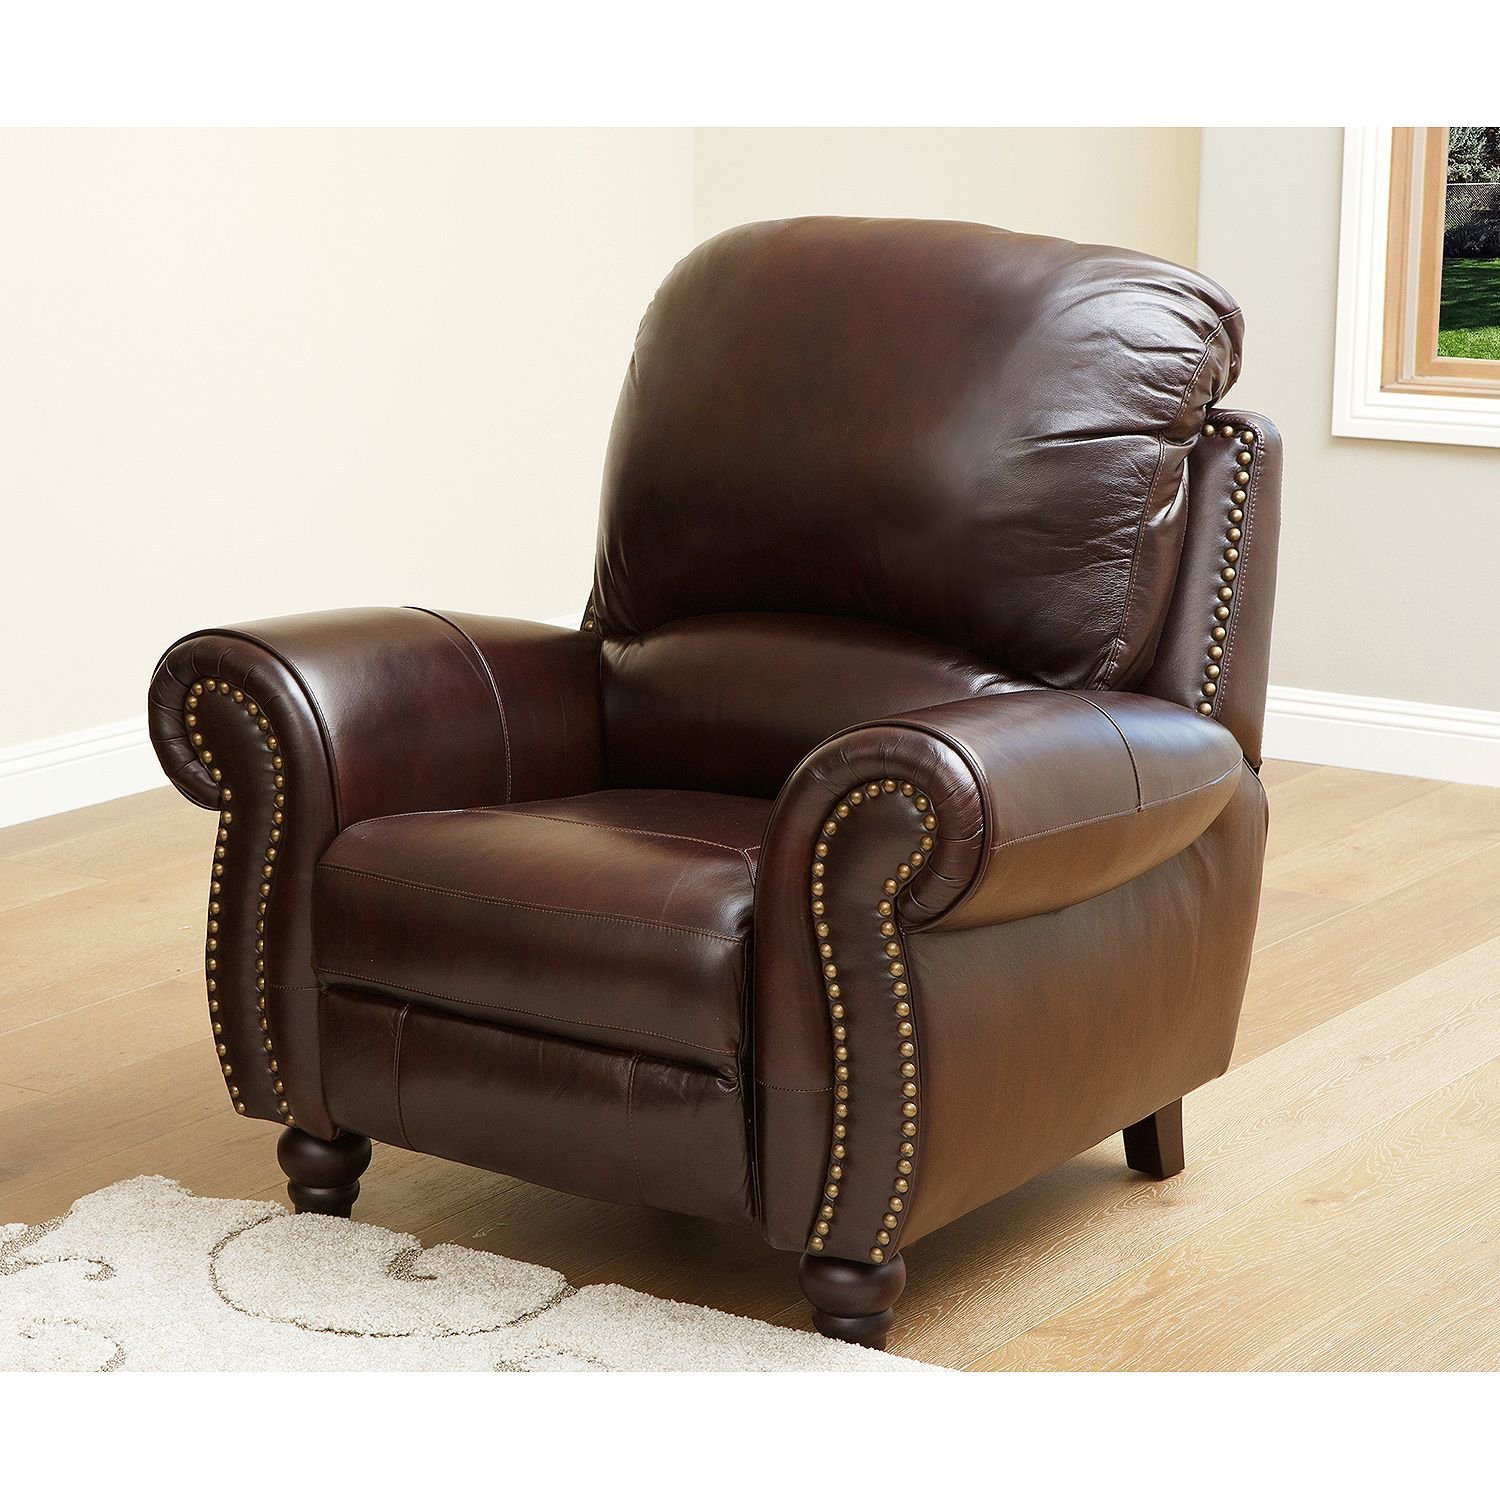 Top-Grain Leather Loveseat Sofa and Arm&Simg